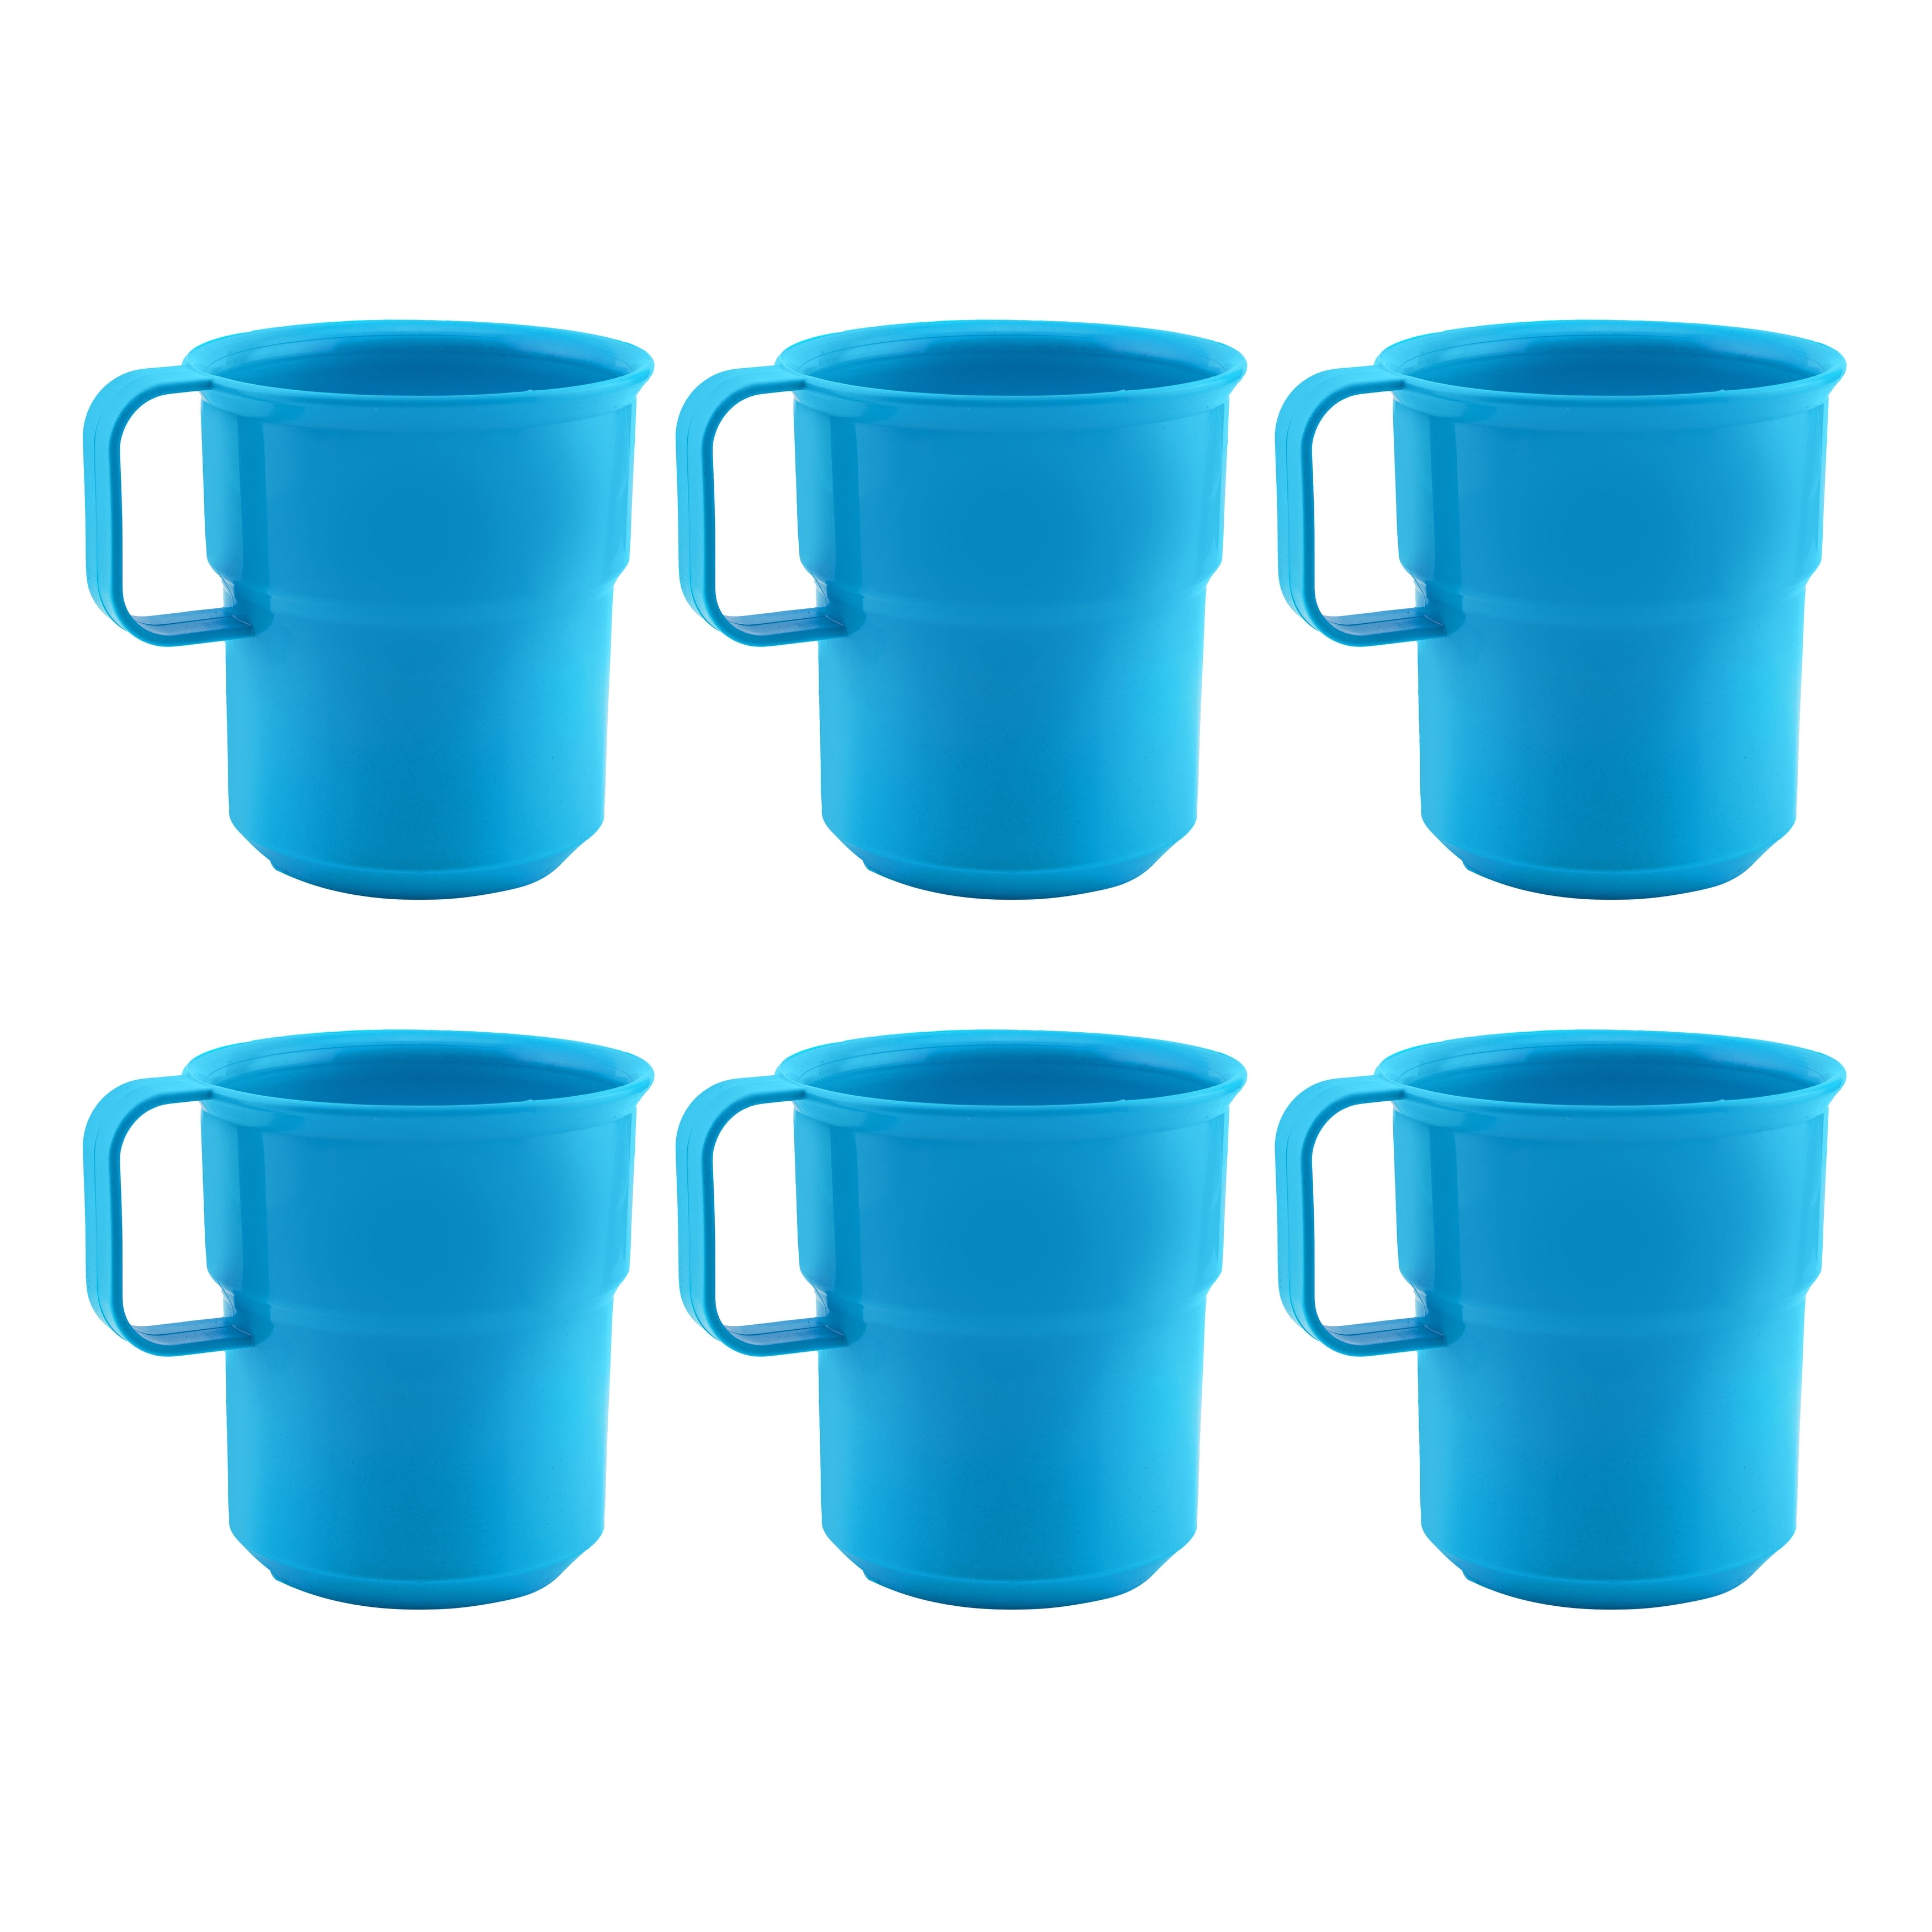 6 Pack Unbreakable Wheat Straw Cups for Coffee, Tea, Milk, Juice, 3 Colors,  Light Blue, Green, and Pink, Reusable Mugs, Dishwasher and Microwave-Safe  (13.8 Ounces)